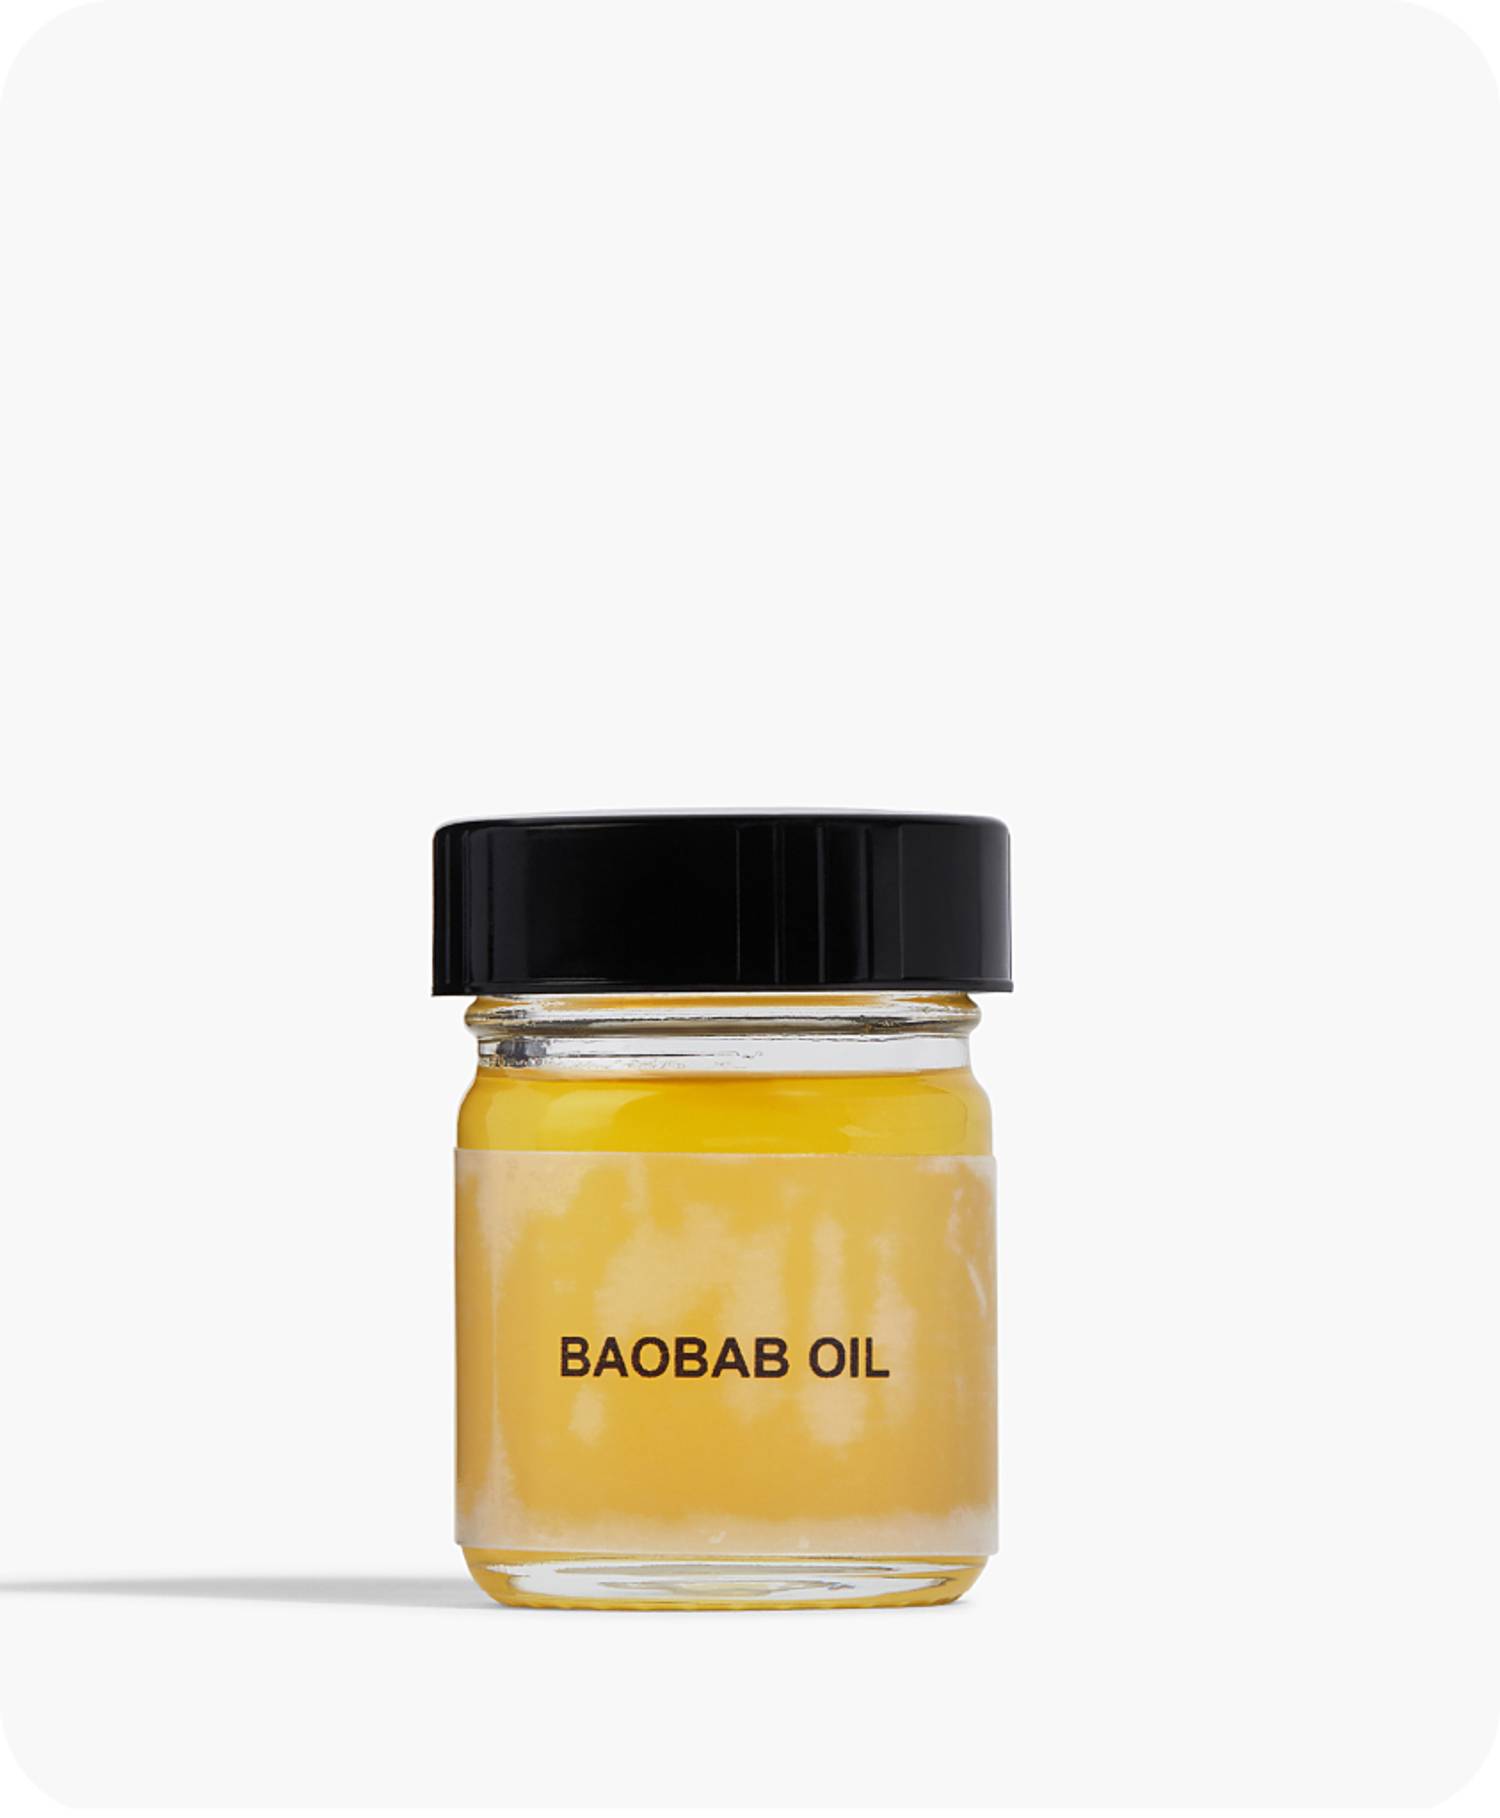 Baobab Seed Oil in natural form